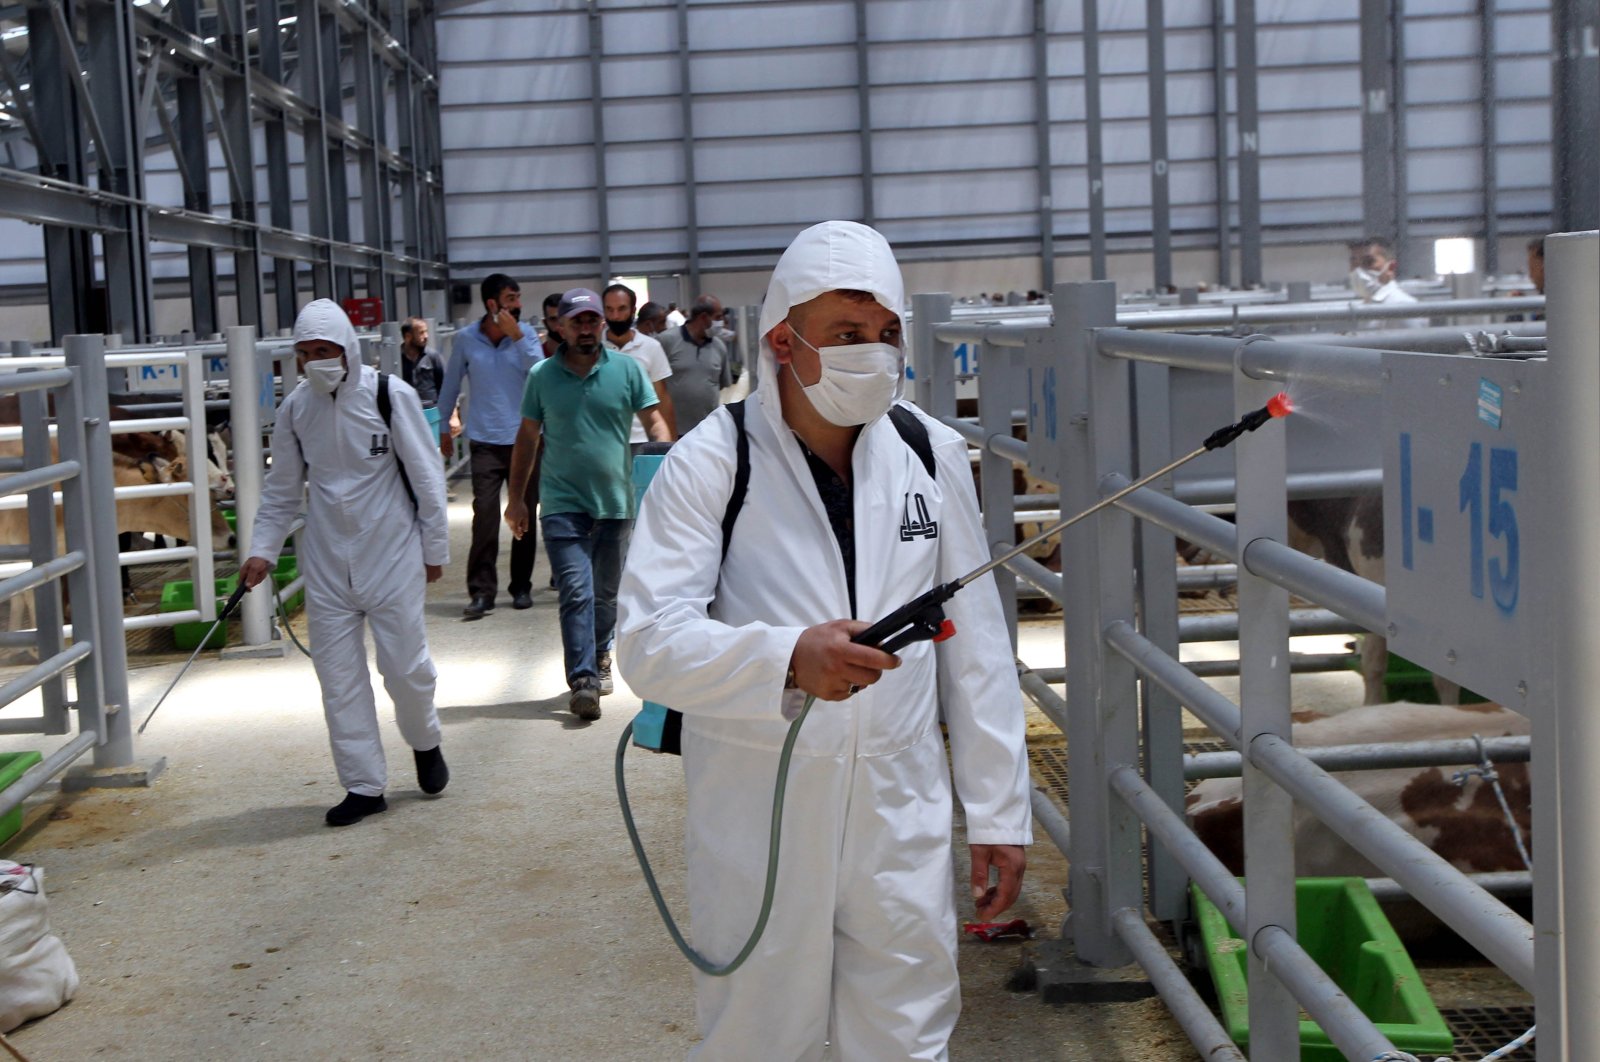 Municipality workers carry out disinfection work to prevent the spread of COVID-19 at a livestock market in Erzurum, Turkey, July 27, 2020. (AA Photo)